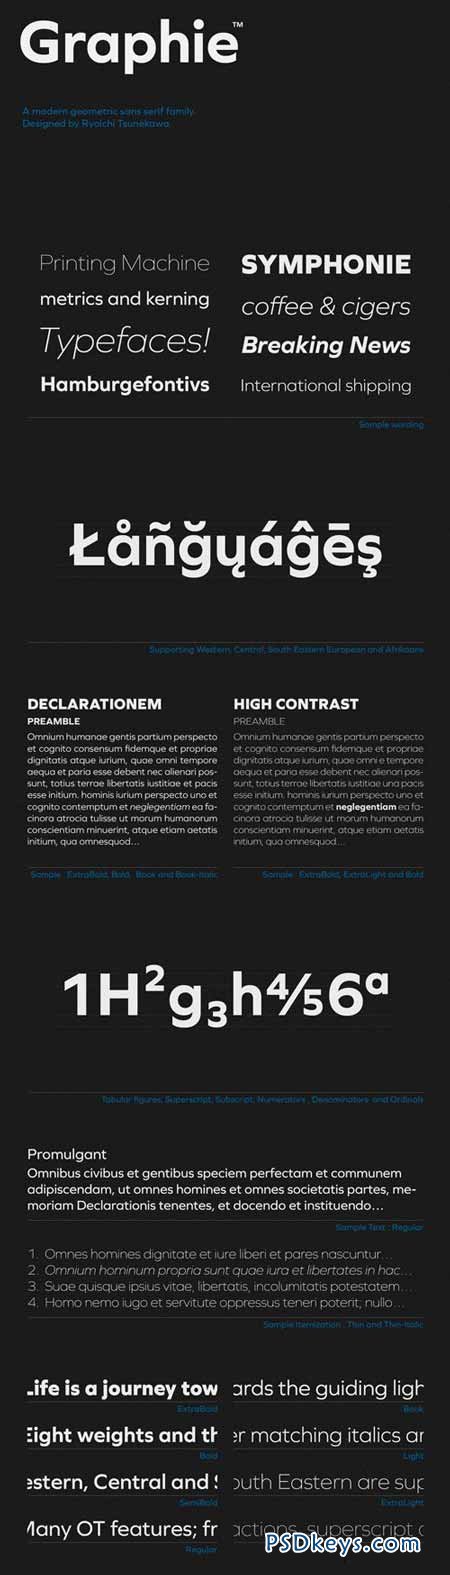 Graphie Font Family - 16 Fonts for $300